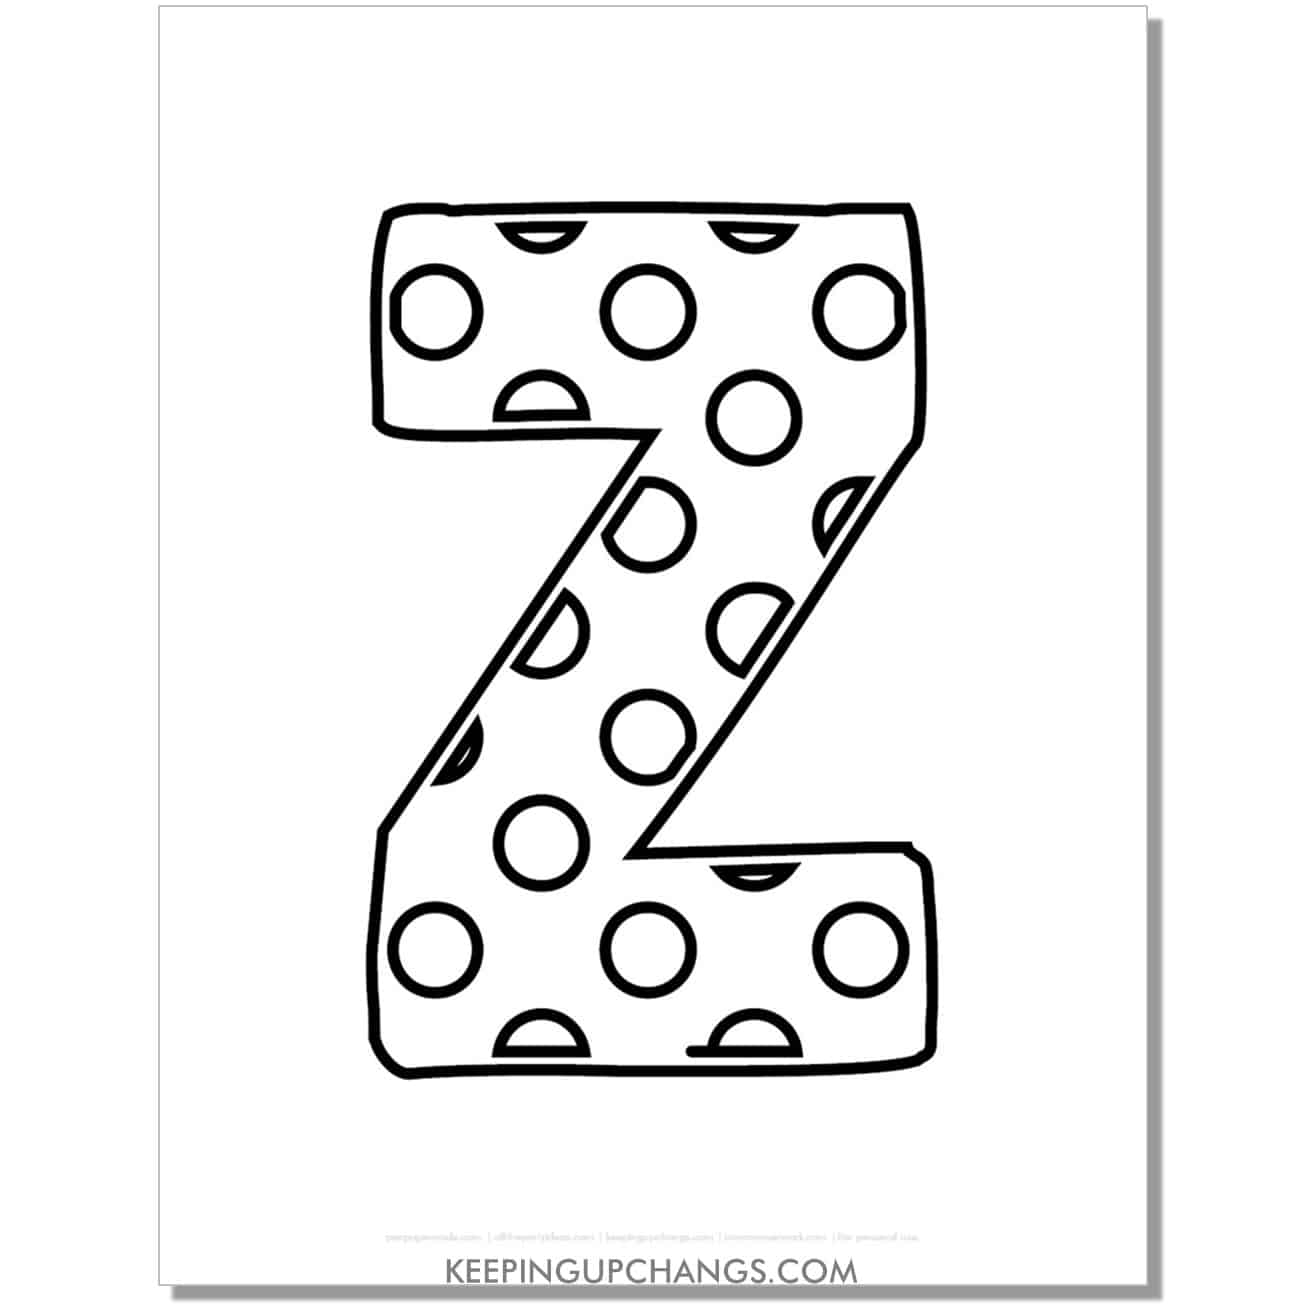 free alphabet letter z coloring page with polka dots for toddlers, preschool, kindergarten.